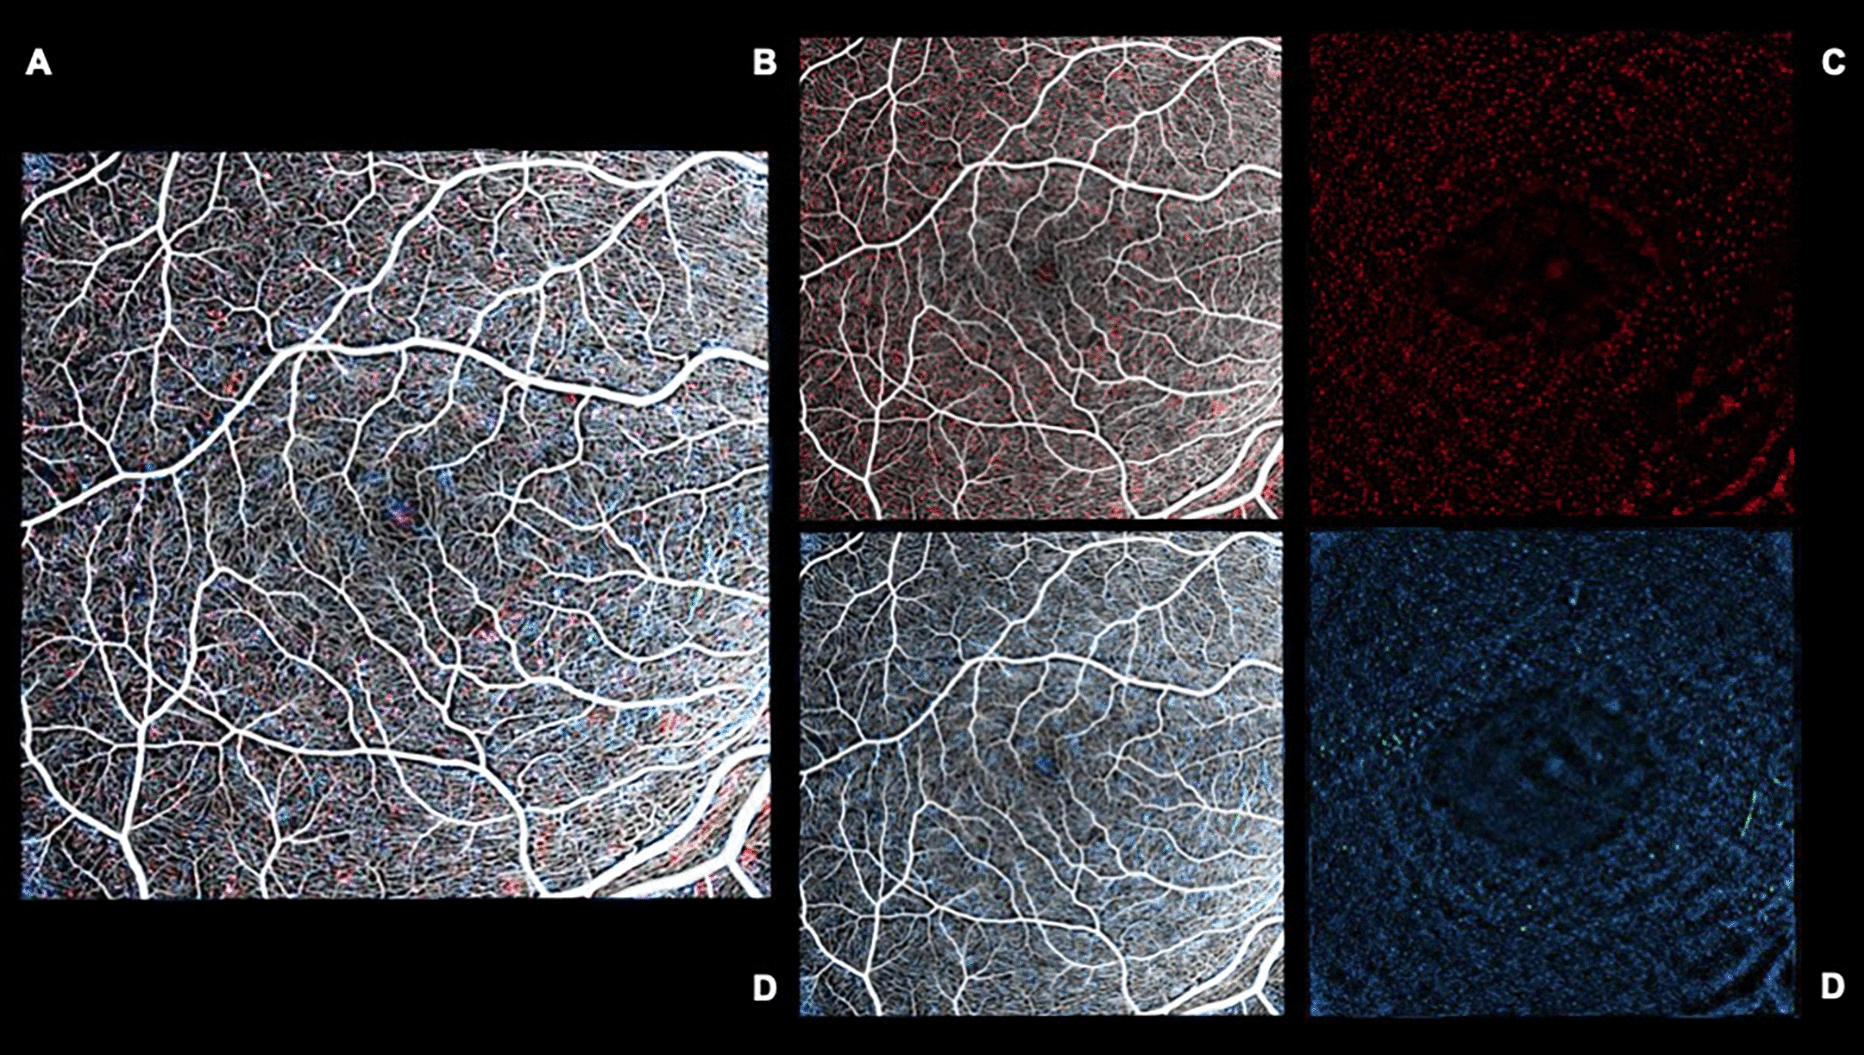 Dancing in the eye: dynamic optical coherence tomography to distinguish different retinal microglia populations